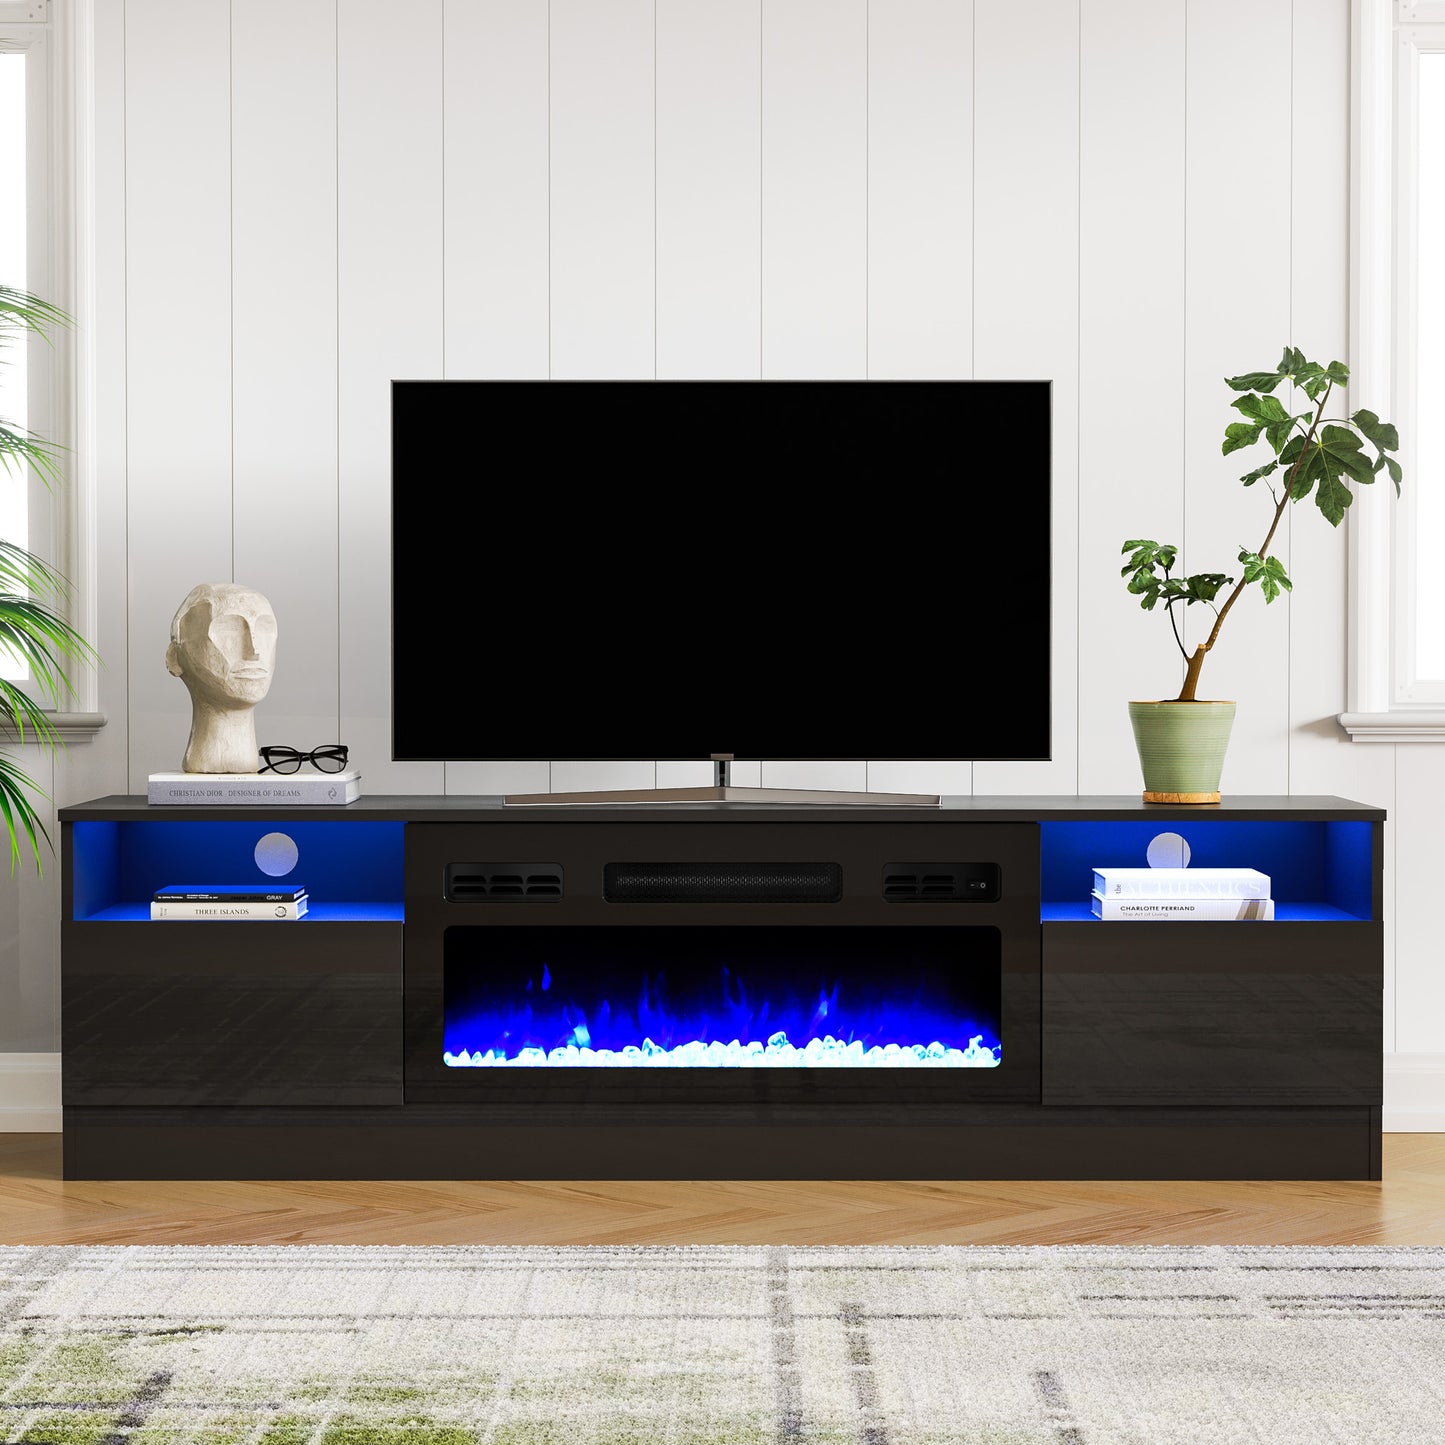 Fireplace TV Stand for 75 inch TV, LED TV Entertainment Center with 30" Electric Fireplace, High Gloss Modern Television Stand